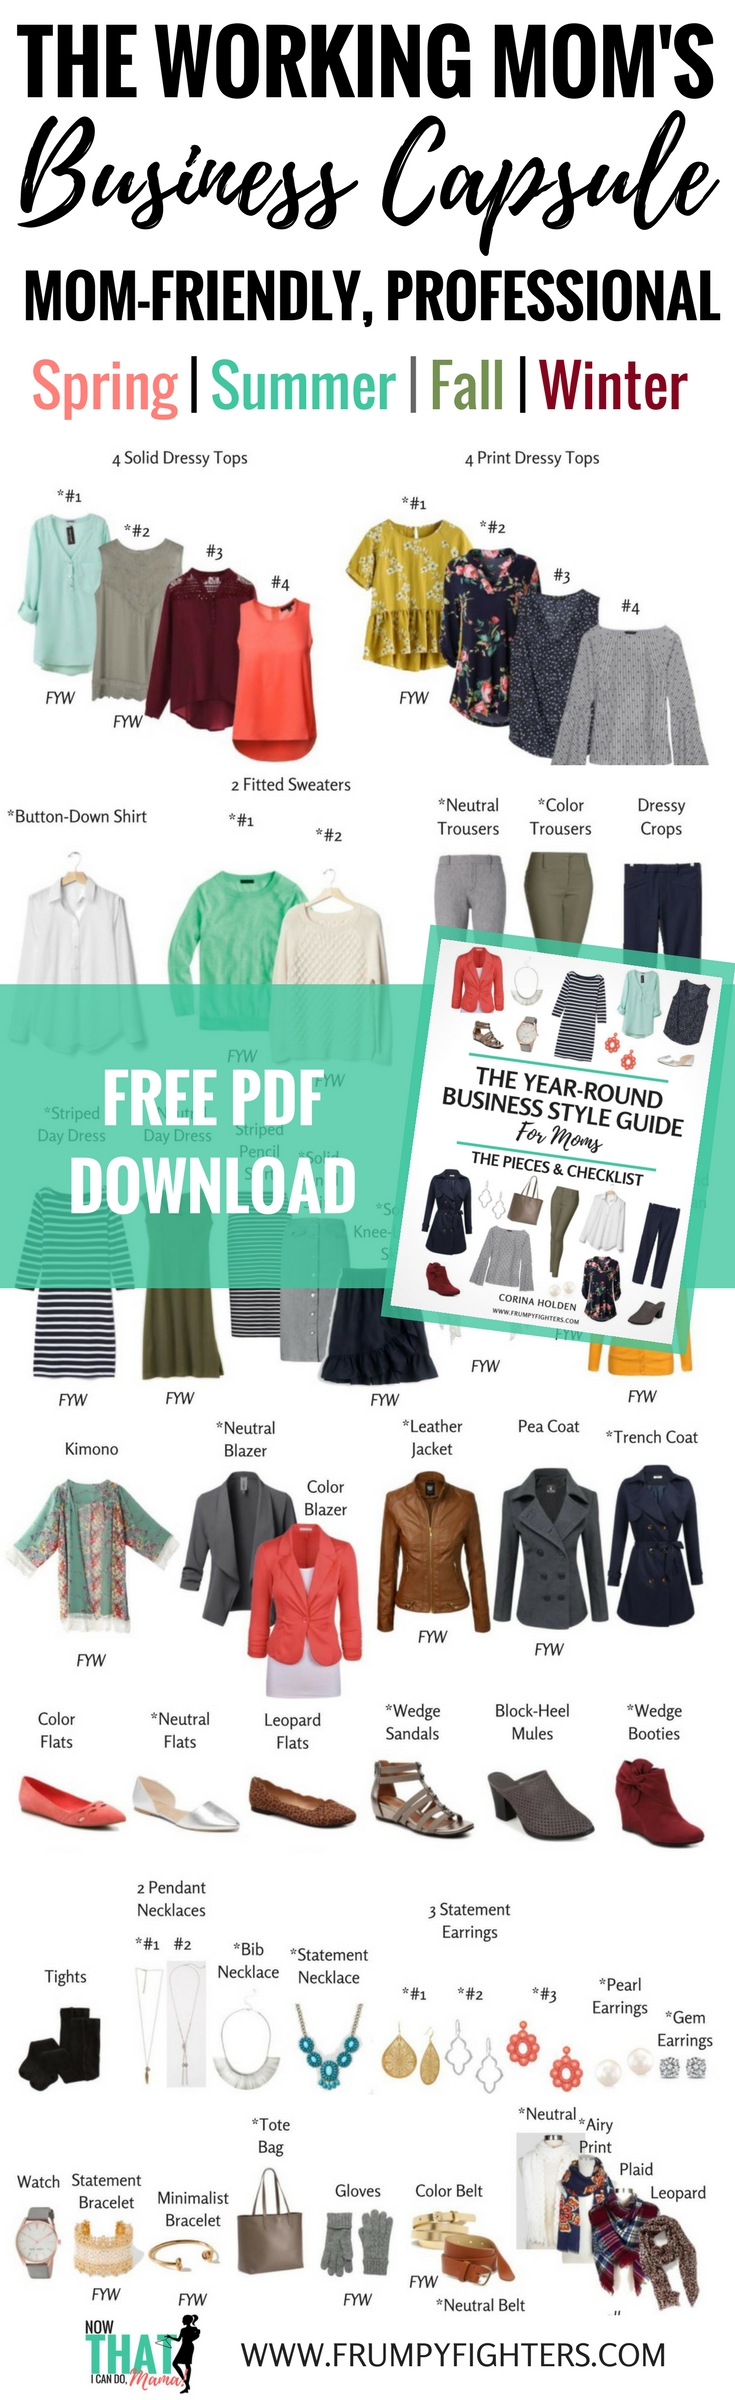 Simple, feminine #capsule wardrobe plan for working MOMS! Designed for professional business office attire while being mom-friendly and budget-friendly. Includes a #free PDF download with visuals and #printable checklist of pieces. Even shopping links to affordable sources like Amazon and Old Navy! Covers spring, summer, fall and winter outfits. LOVE this site!! #mom #fashion #outfits #budget #tips #ideas #easy #clothes #style #fall #winter #spring #summer #shopping #momlife #freeprintable #work